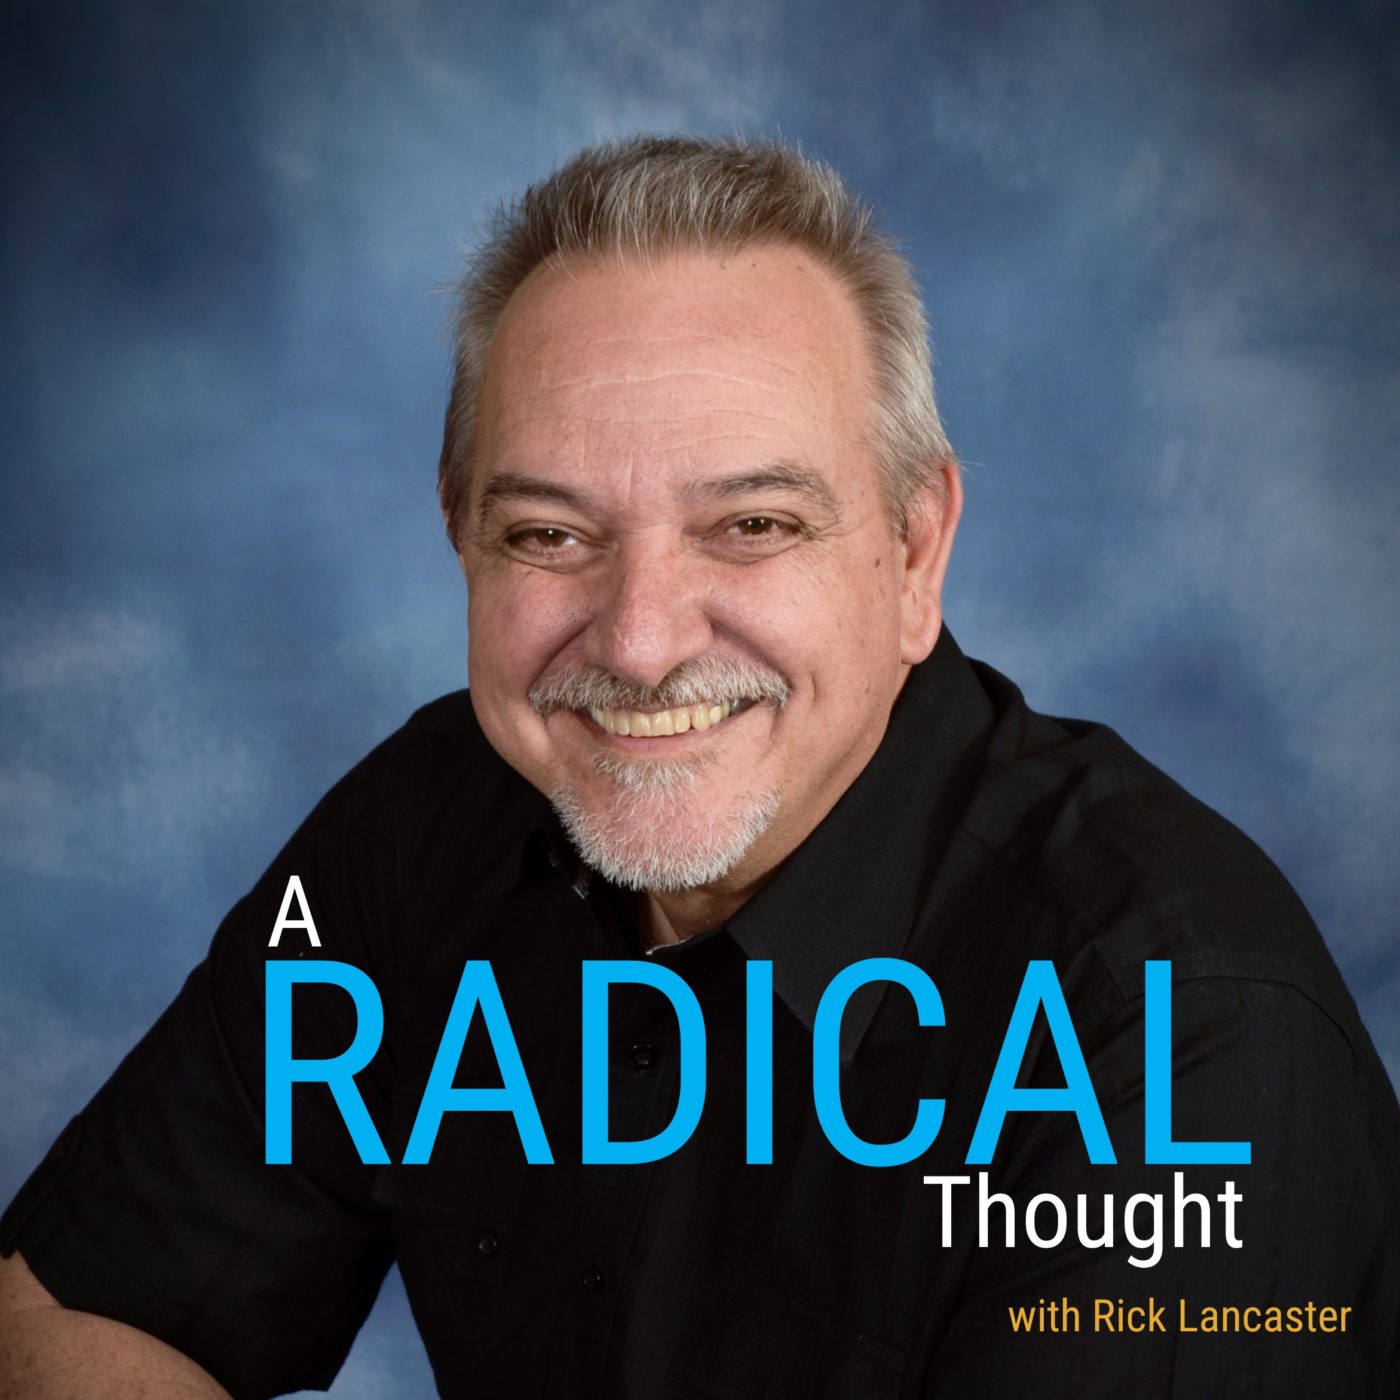 A Radical Thought